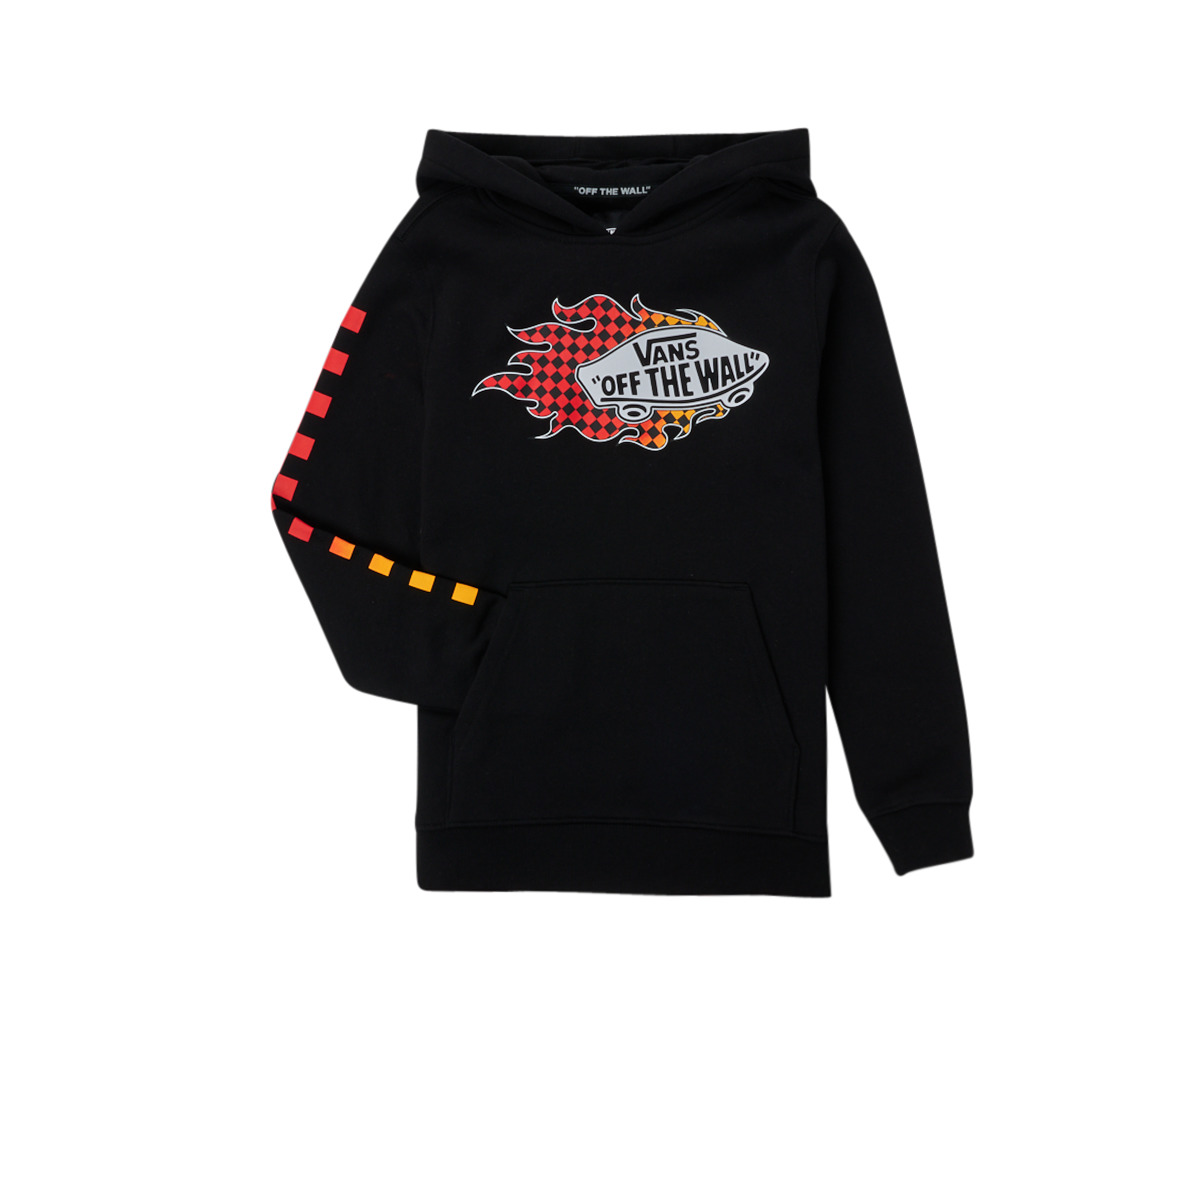 Vans LOGO - NET Black Free Clothing PO ! delivery sweaters | Spartoo - Child